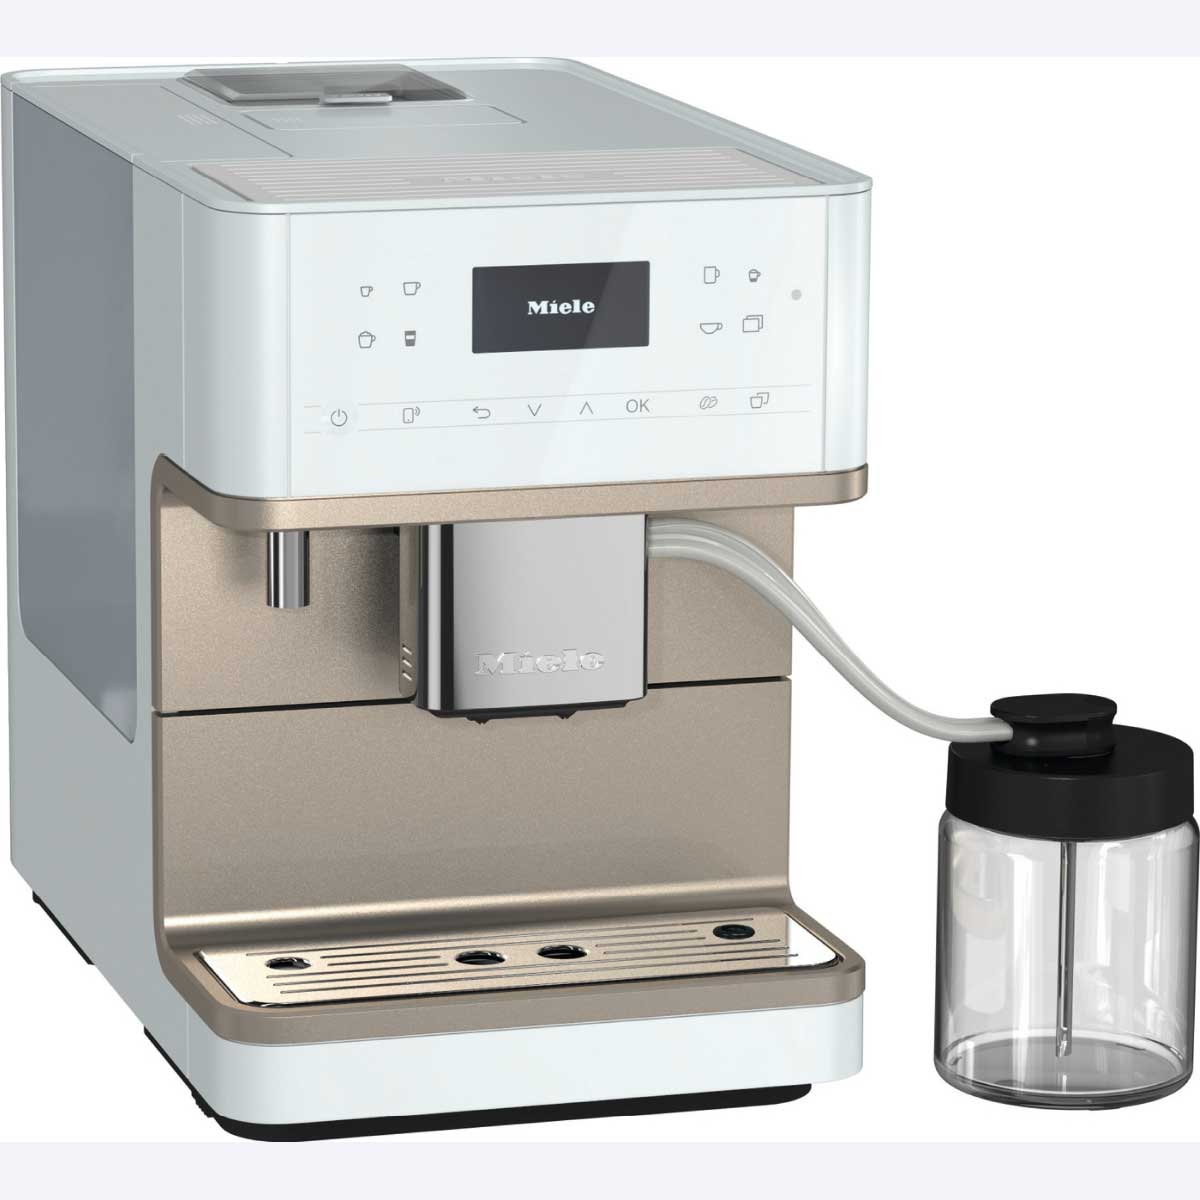 Miele Cm 6360 White 11580960 Countertop Coffee Machine Cmc Electric Buy Electrical Appliances In Cyprus